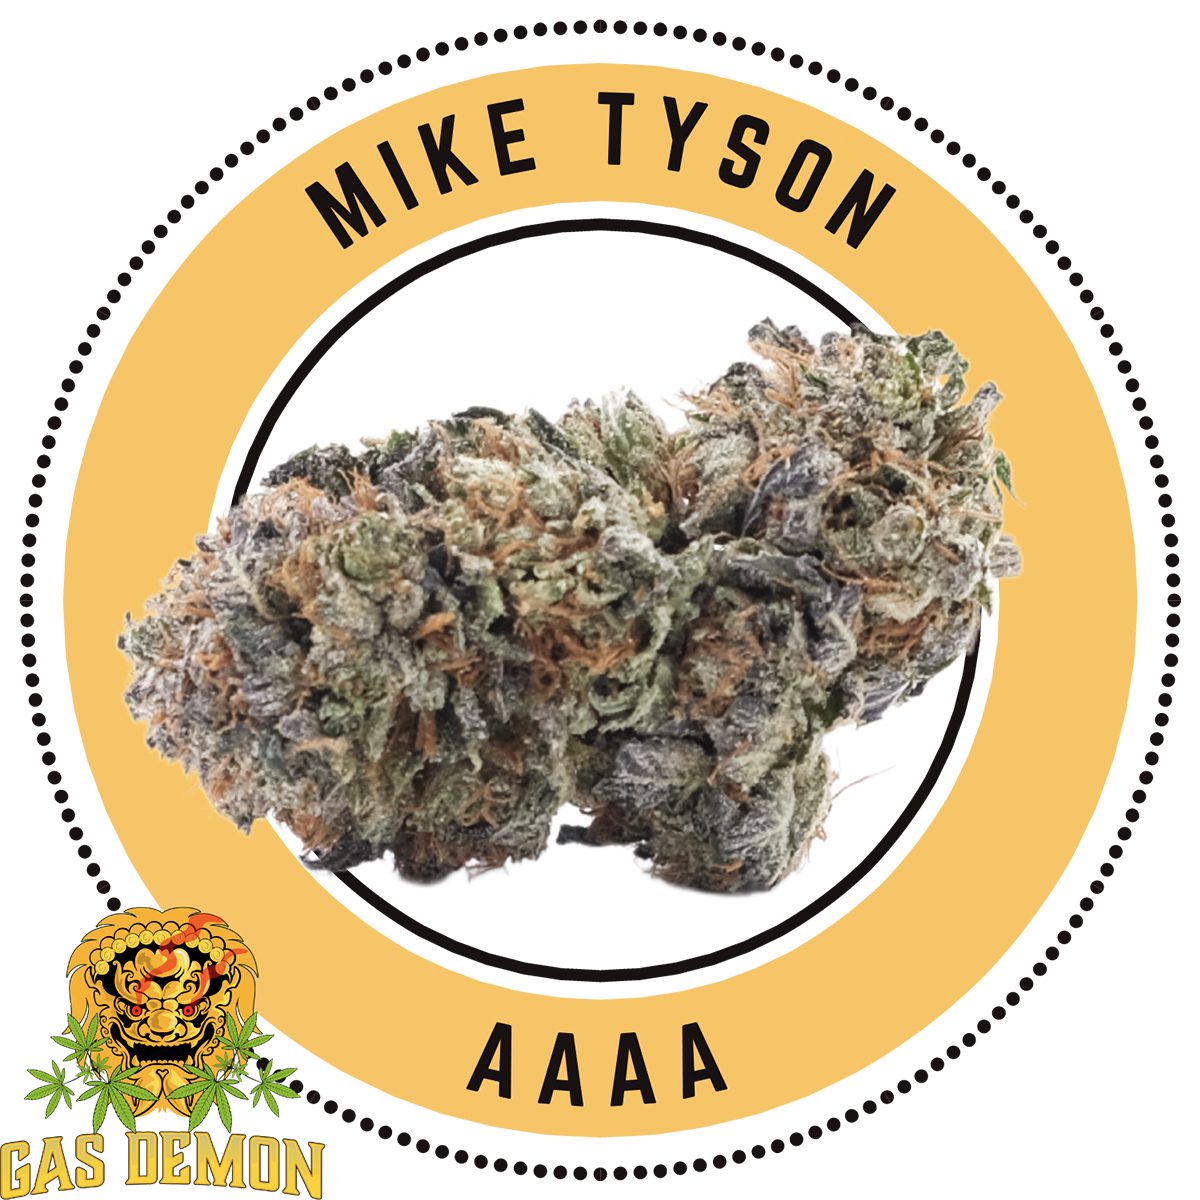 Mike Tyson Indica By Gas Demon